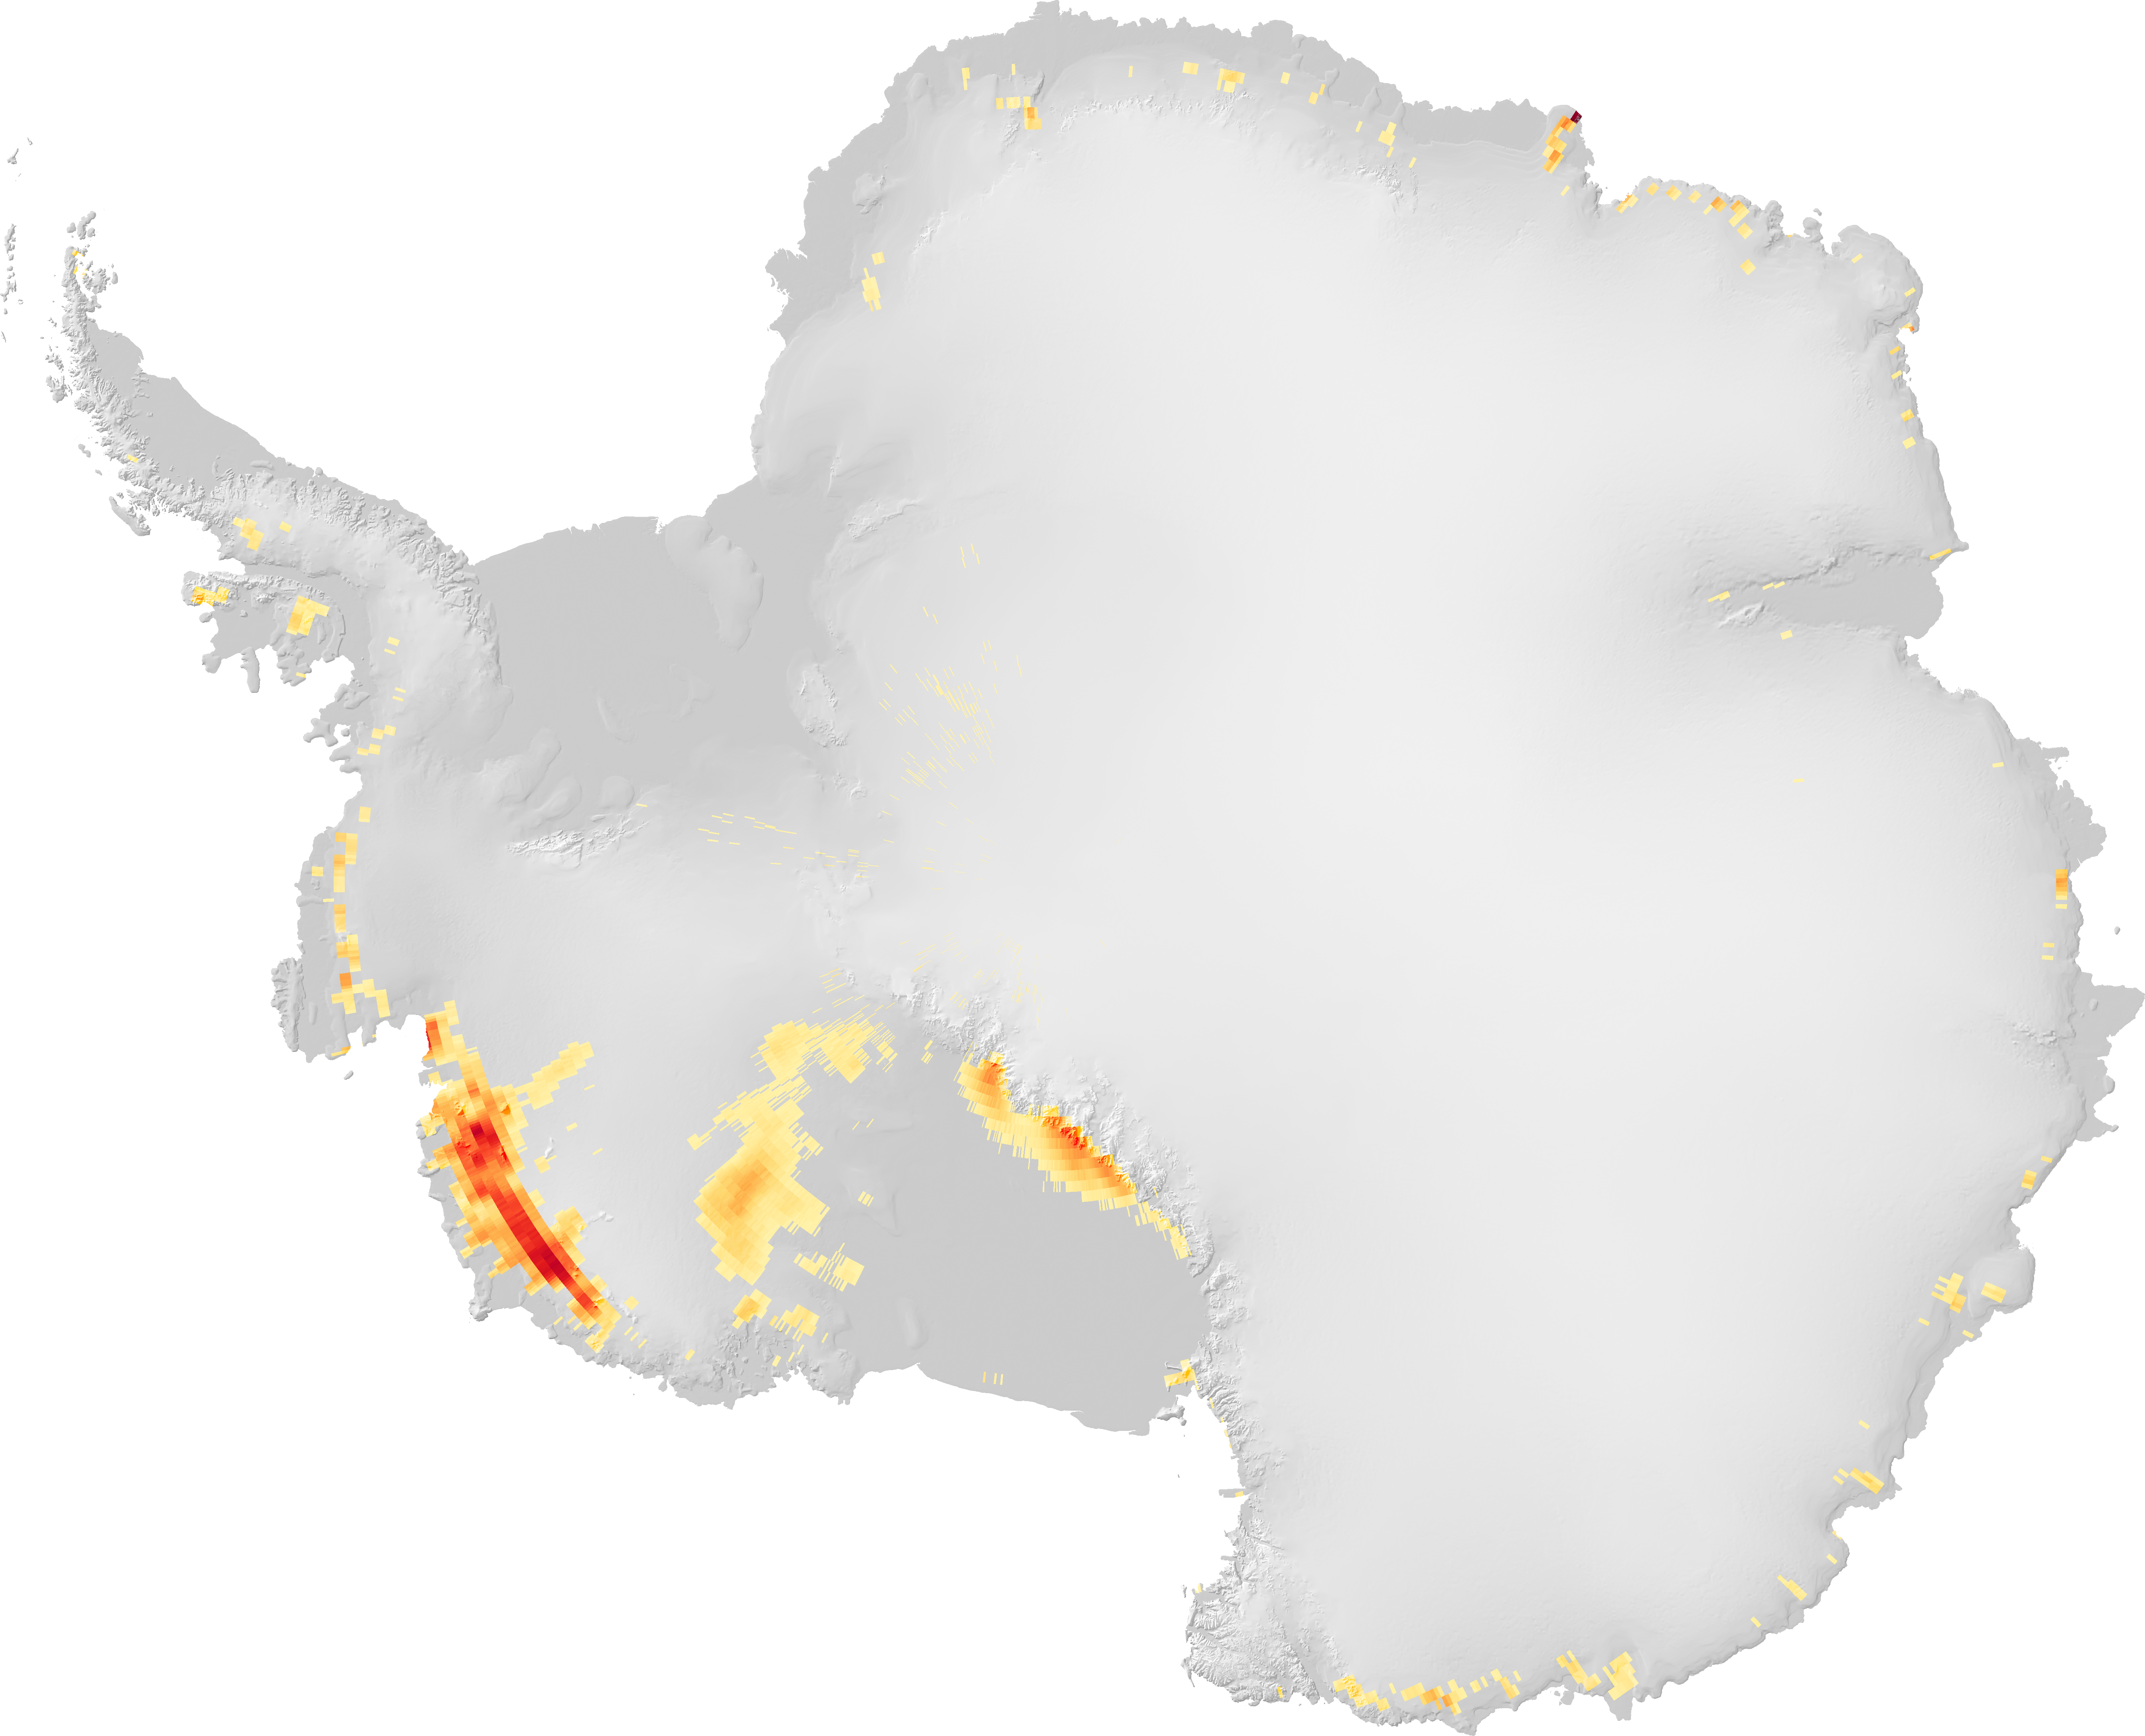 Large Area of Antarctica Melted, Re-Froze in 2005 - related image preview